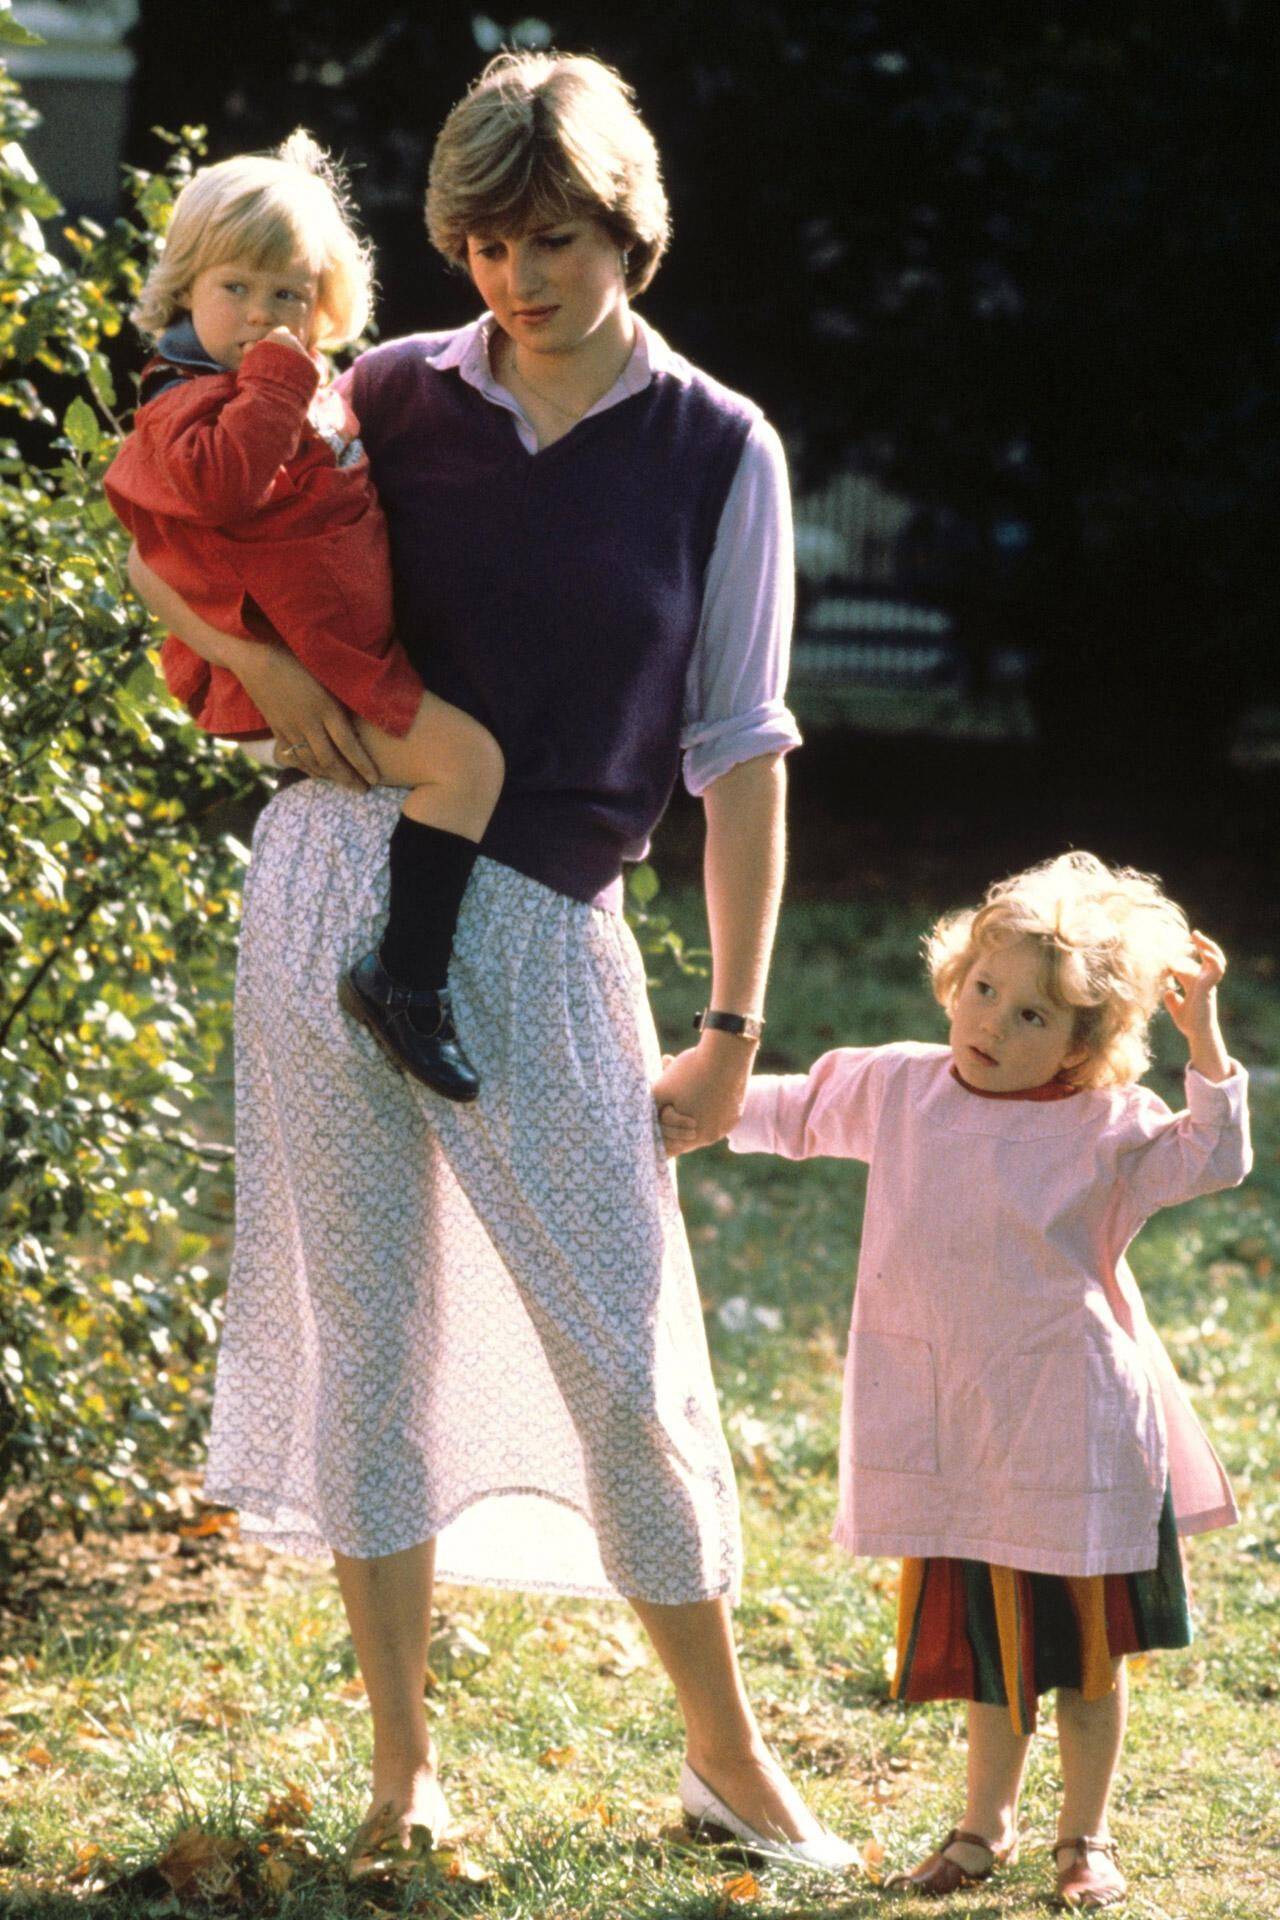  Lady Diana Spencer at The Young England Kindergarten, London, on September 17, 1980.